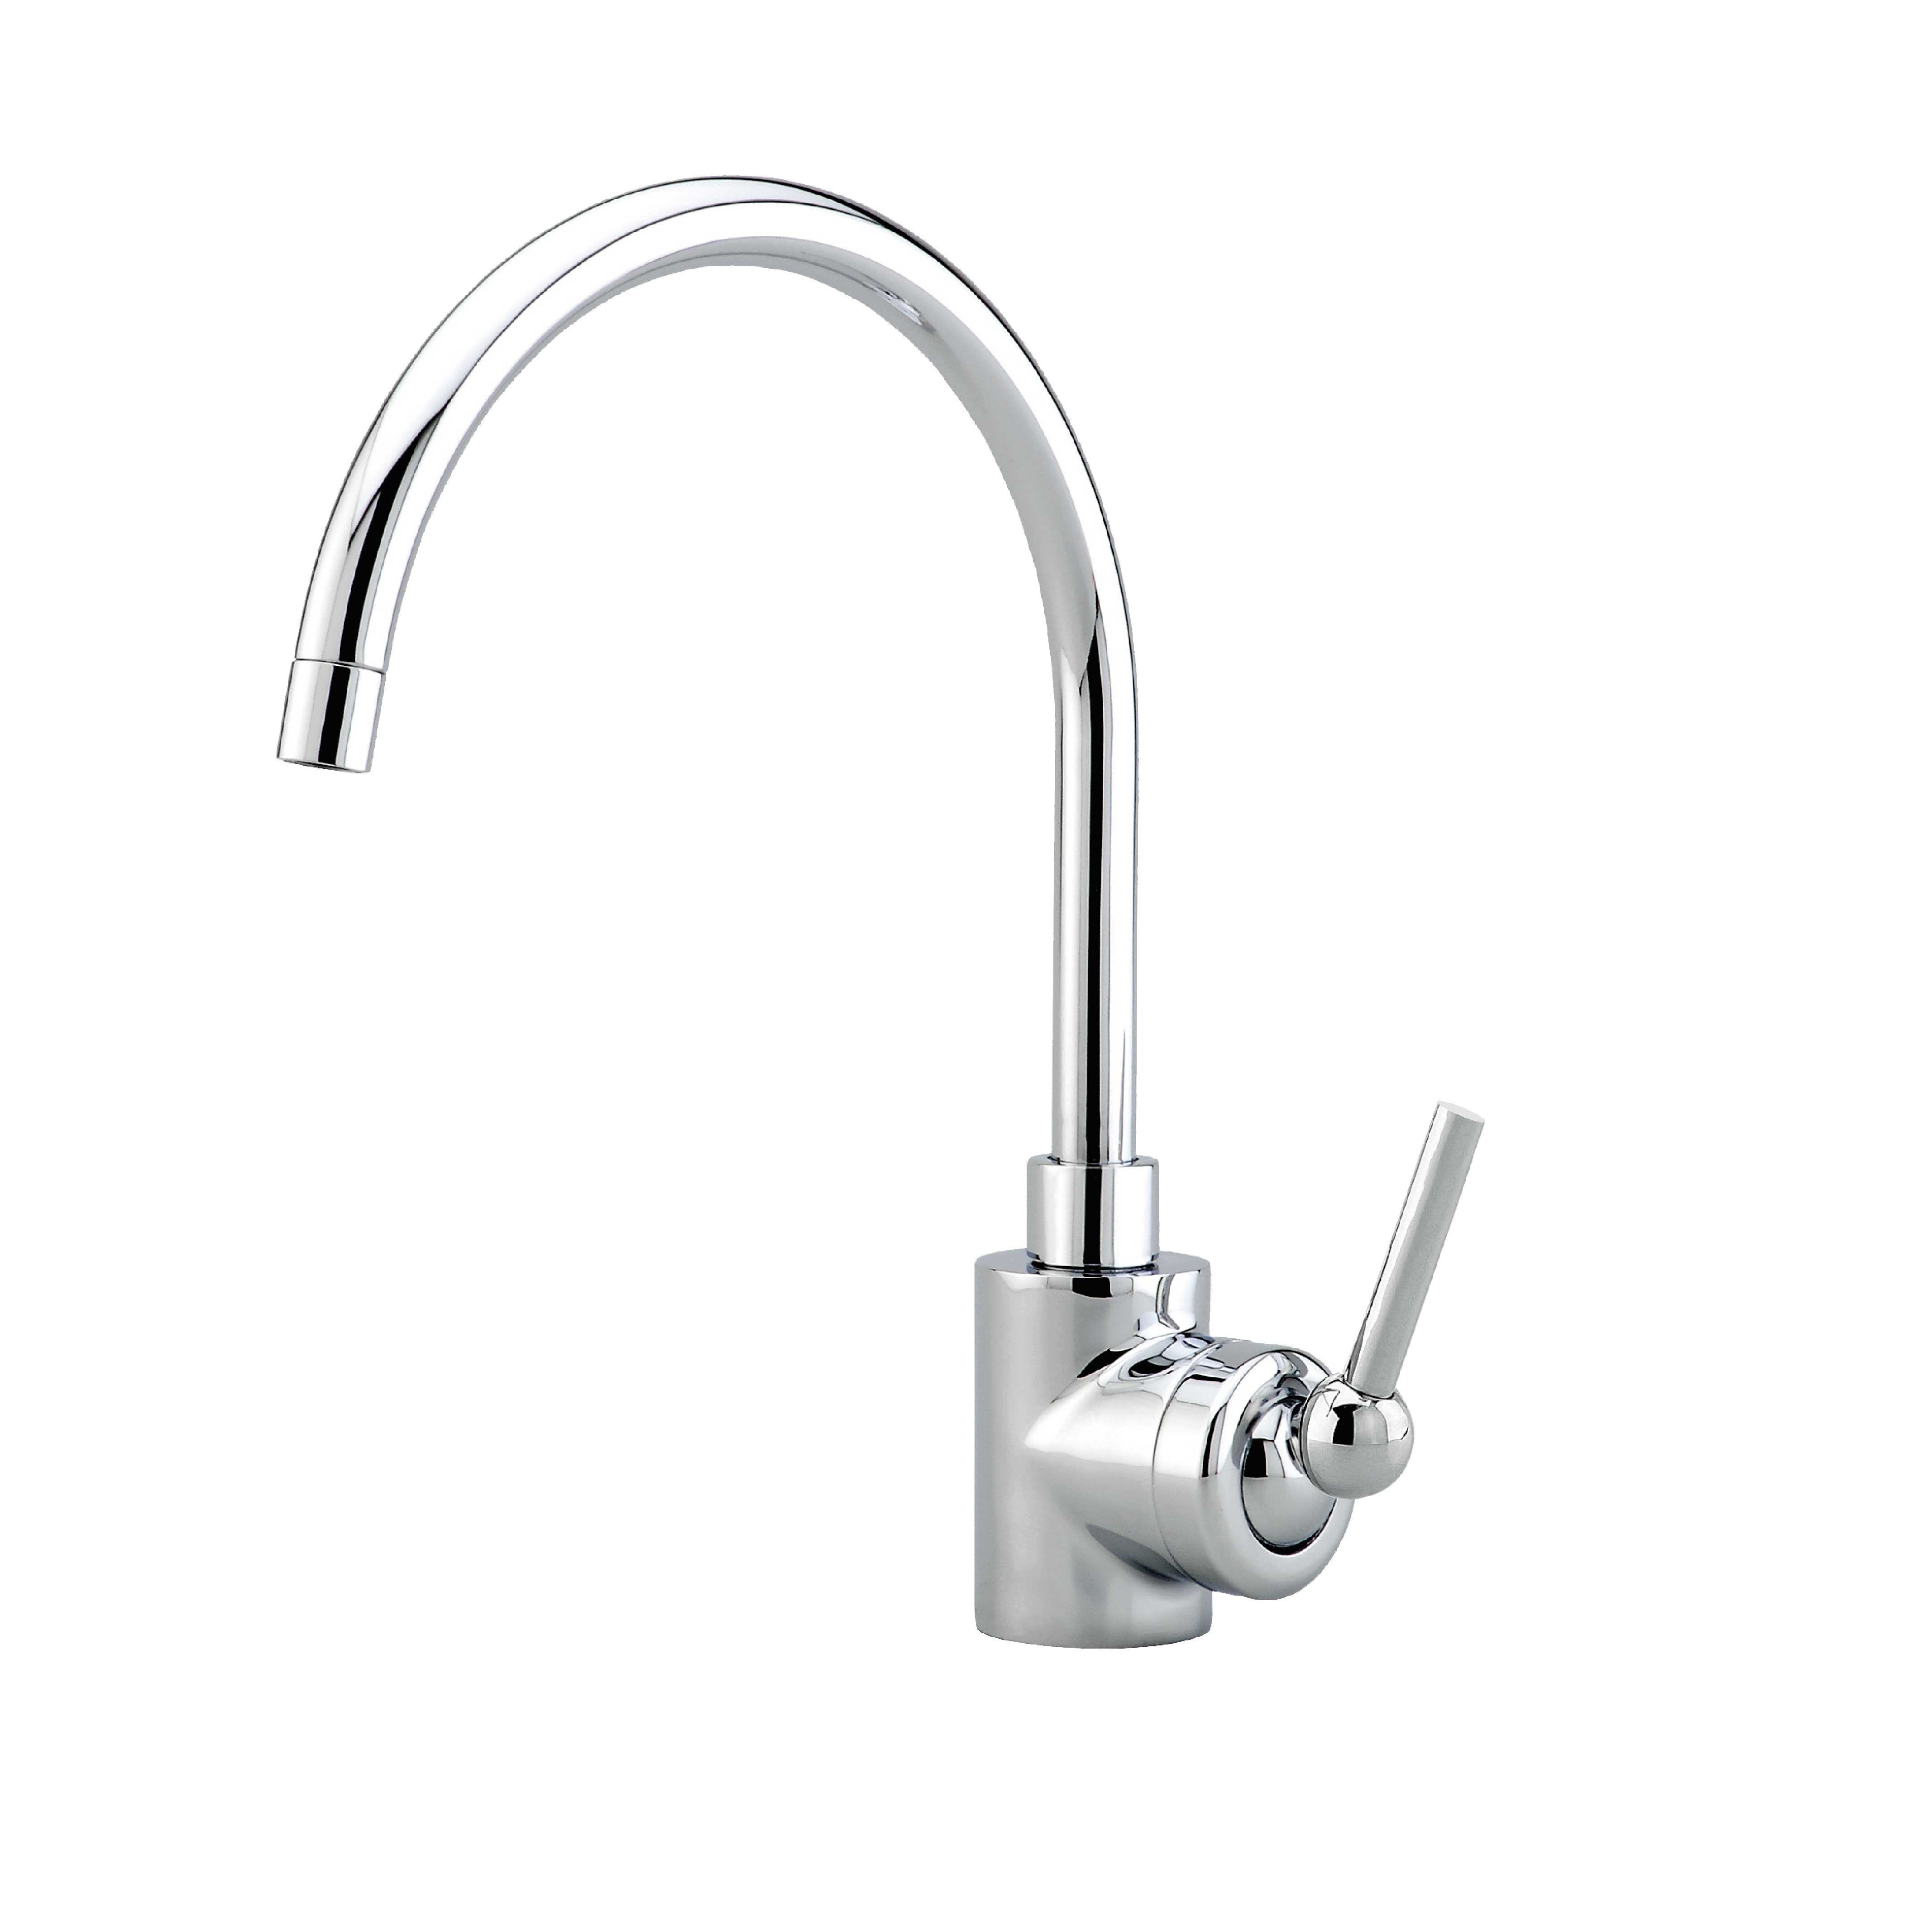 MKC-1BY2 Single-hole lever kitchen mixer